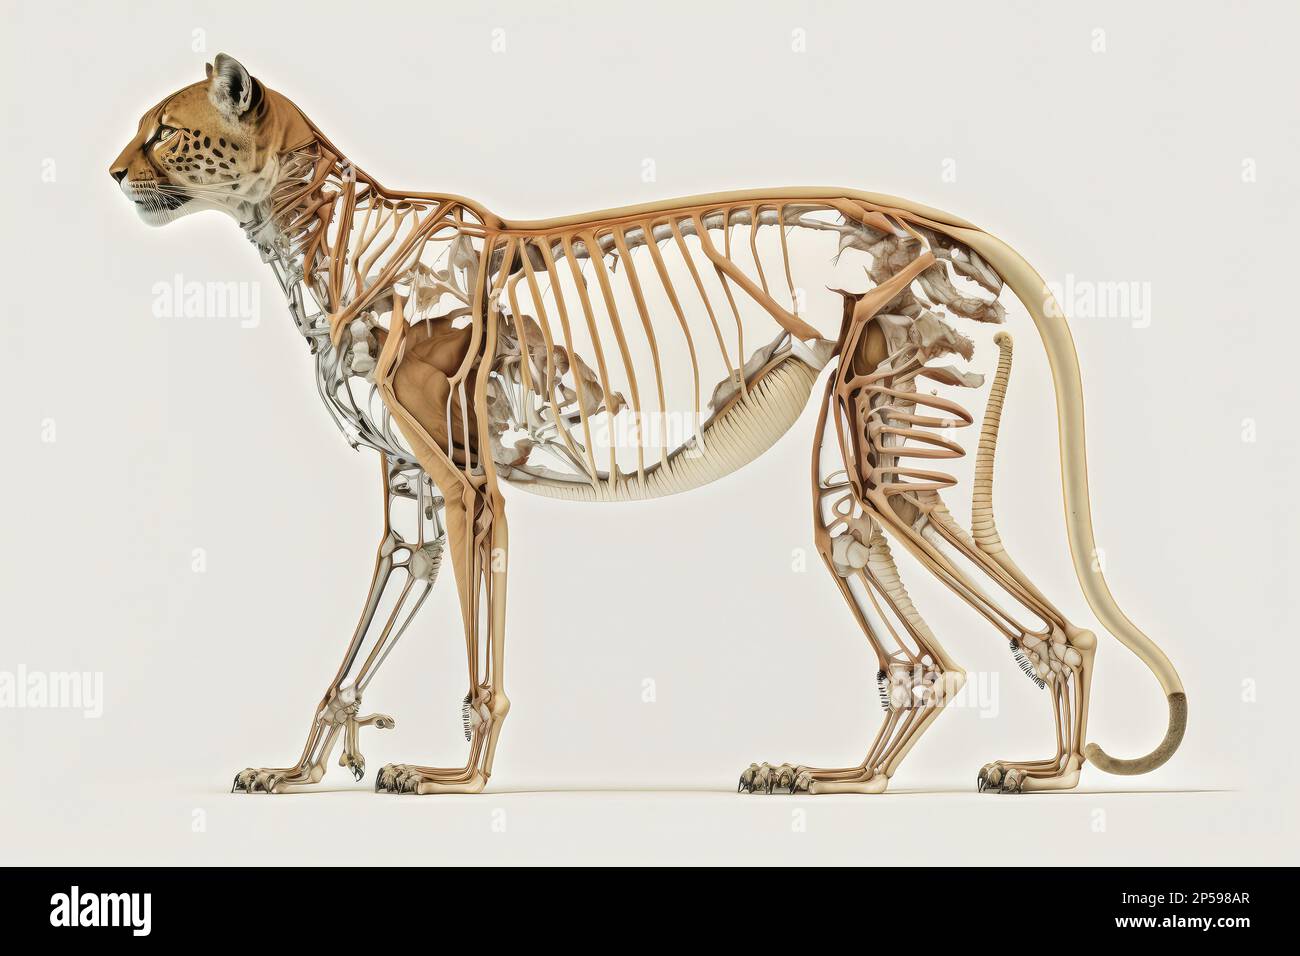 An anatomical skeleton of a big cat puma on a white background Stock Photo  - Alamy